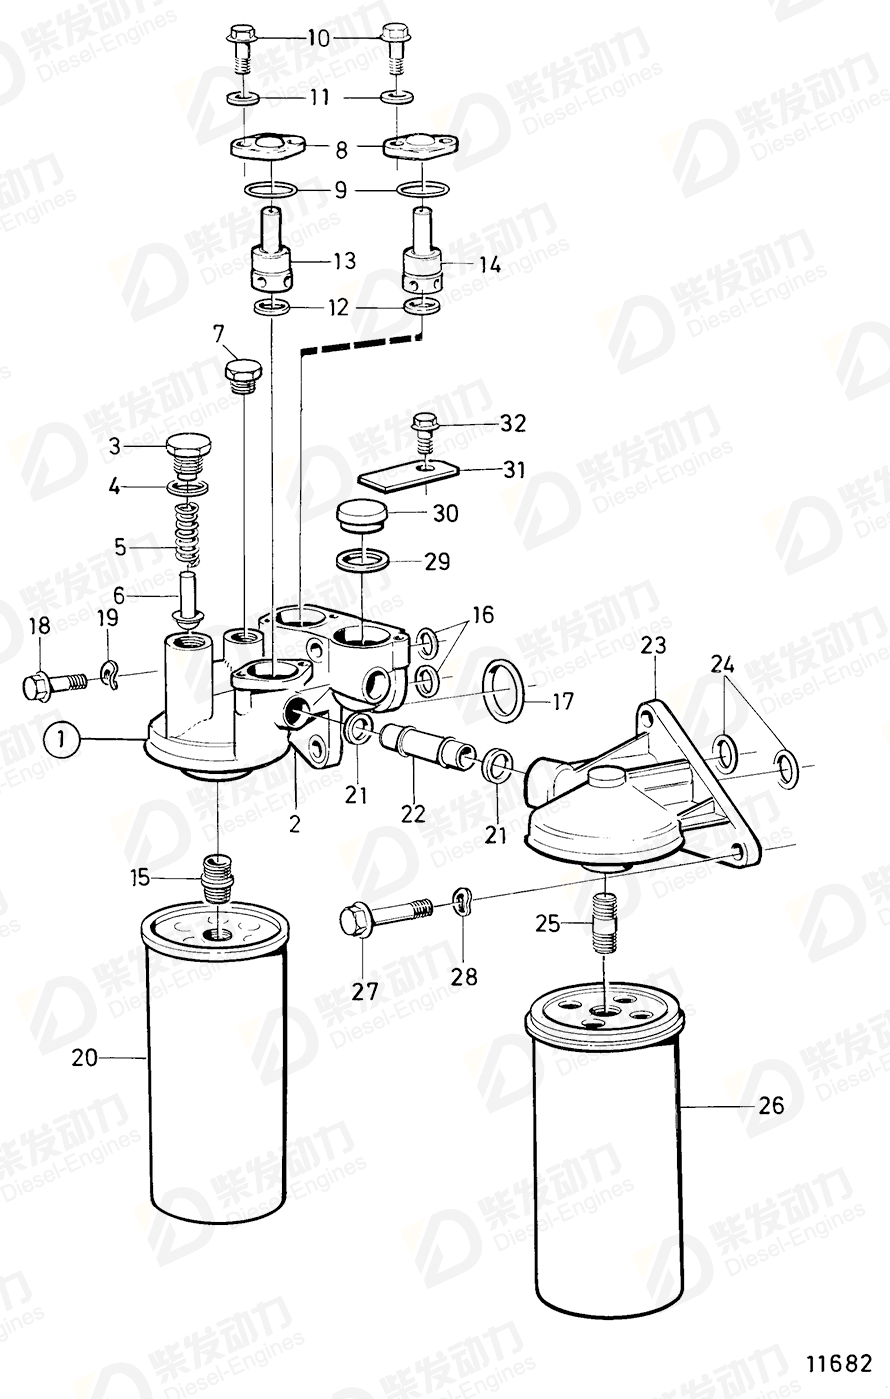 VOLVO Oil filter housing 864611 Drawing